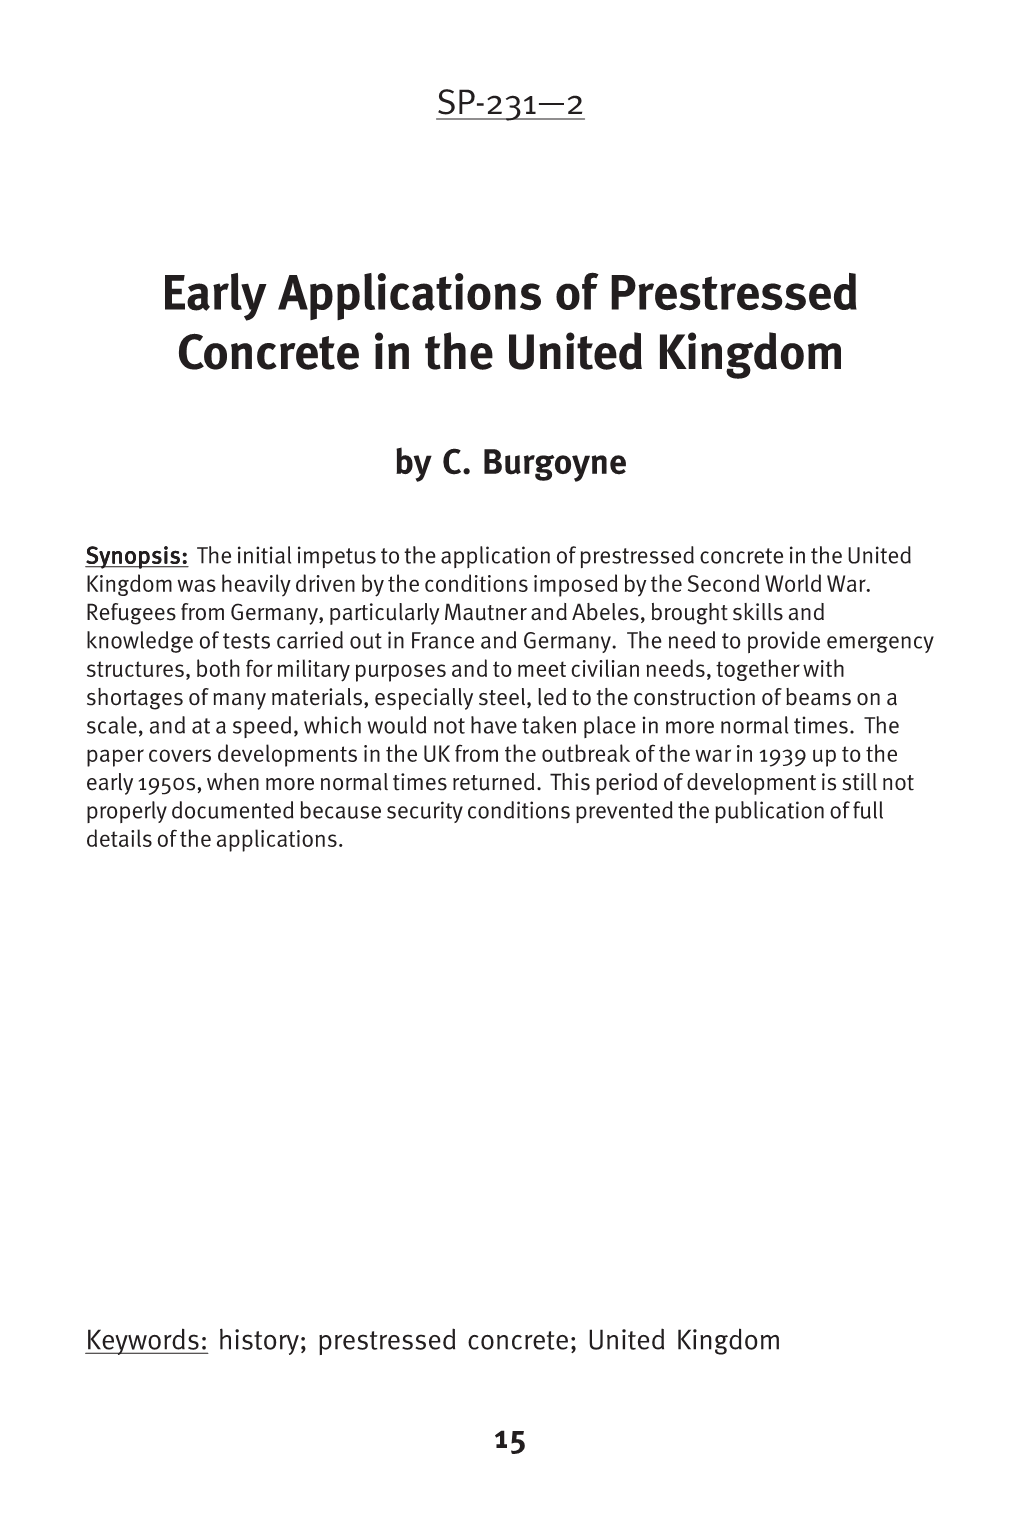 Early Applications of Prestressed Concrete in the United Kingdom